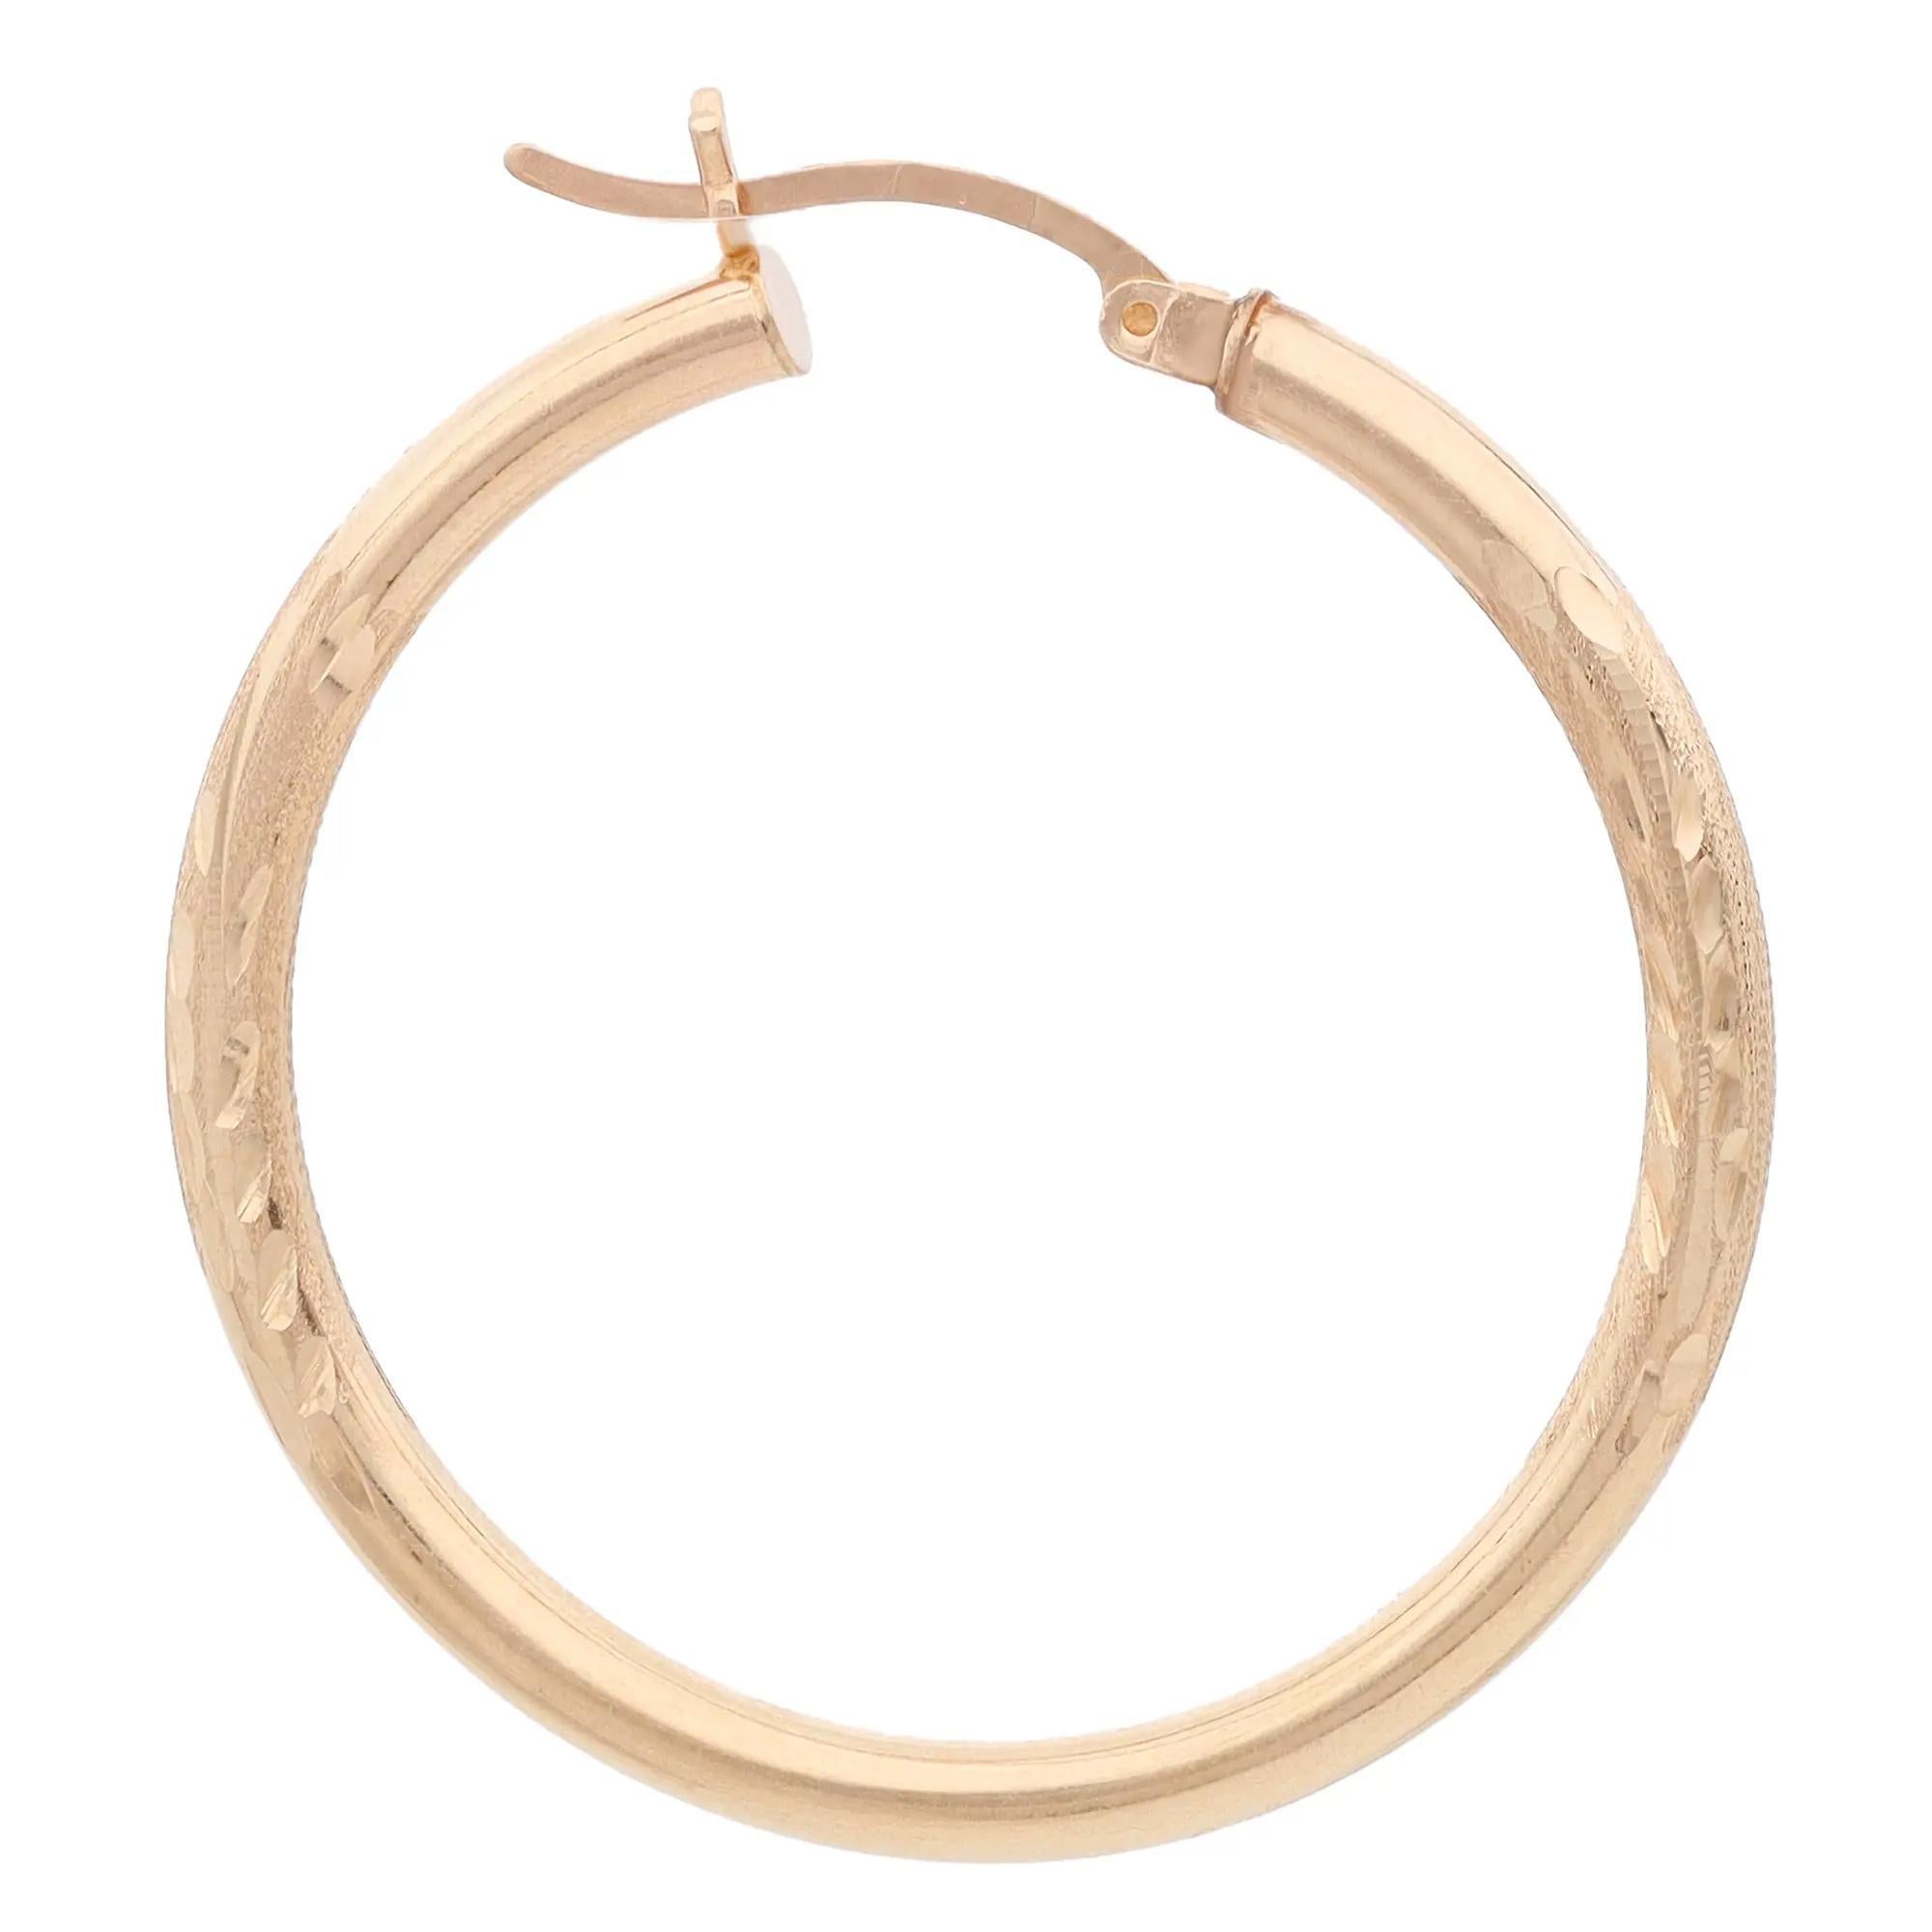 Elevate any attire with these dazzling textured hoop earrings. Crafted in lustrous 14K yellow gold. Earring length: 1.5 inches. Width: 2.9mm. Total weight: 3.94 grams. Comes with a presentable gift box.
